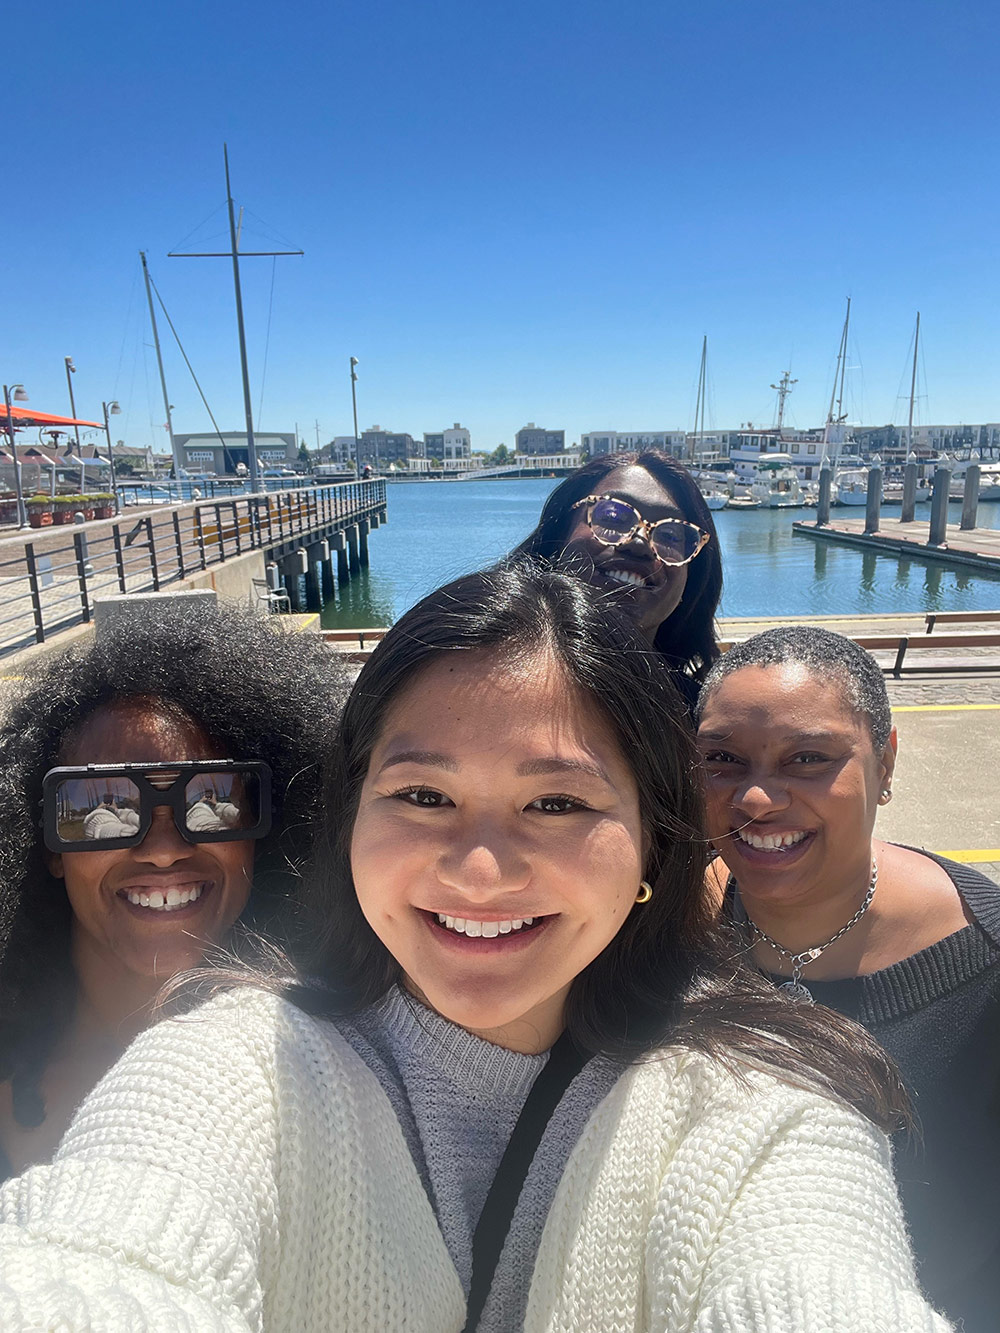 Four members of our Diversity, Equity and Inclusion team stand close together on a pier, with blue water and blue sky behind them